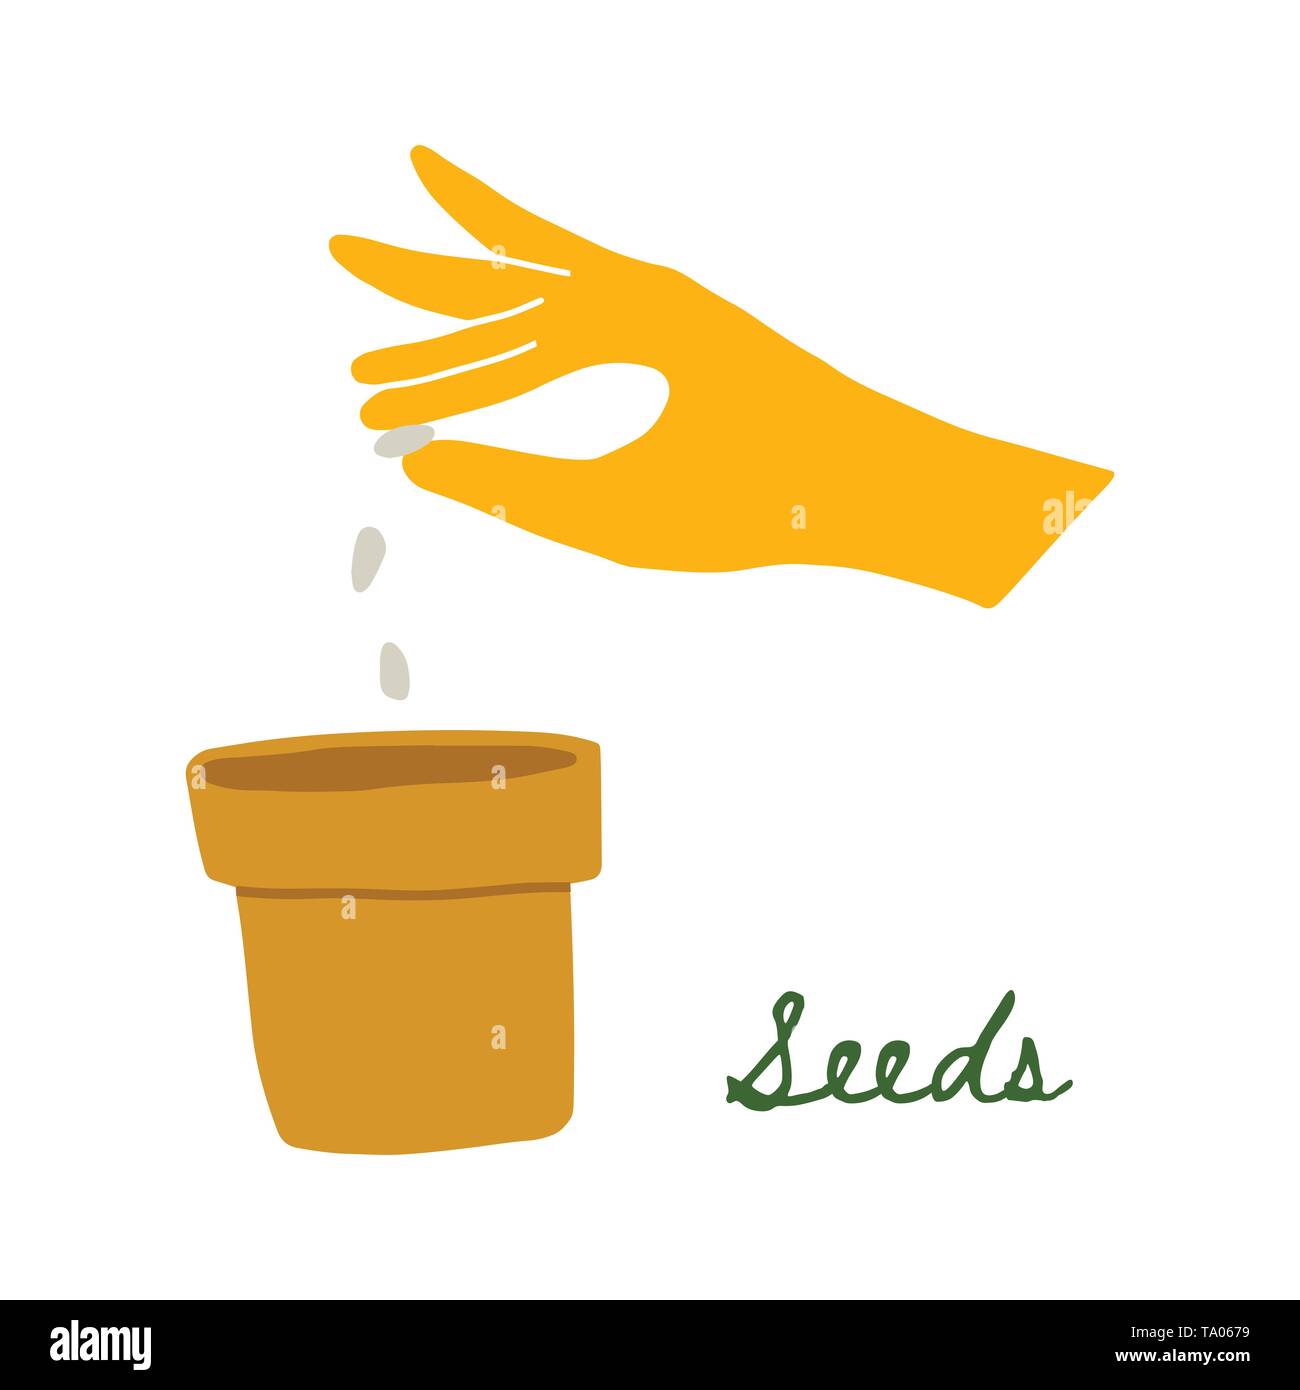 Vector Illustration of a Hand in a Yellow Rubber Glove Planting Seeds in a Pot. Hand Draw Doodle Style. Garden hands grow vegetables. Home garden. Stock Vector